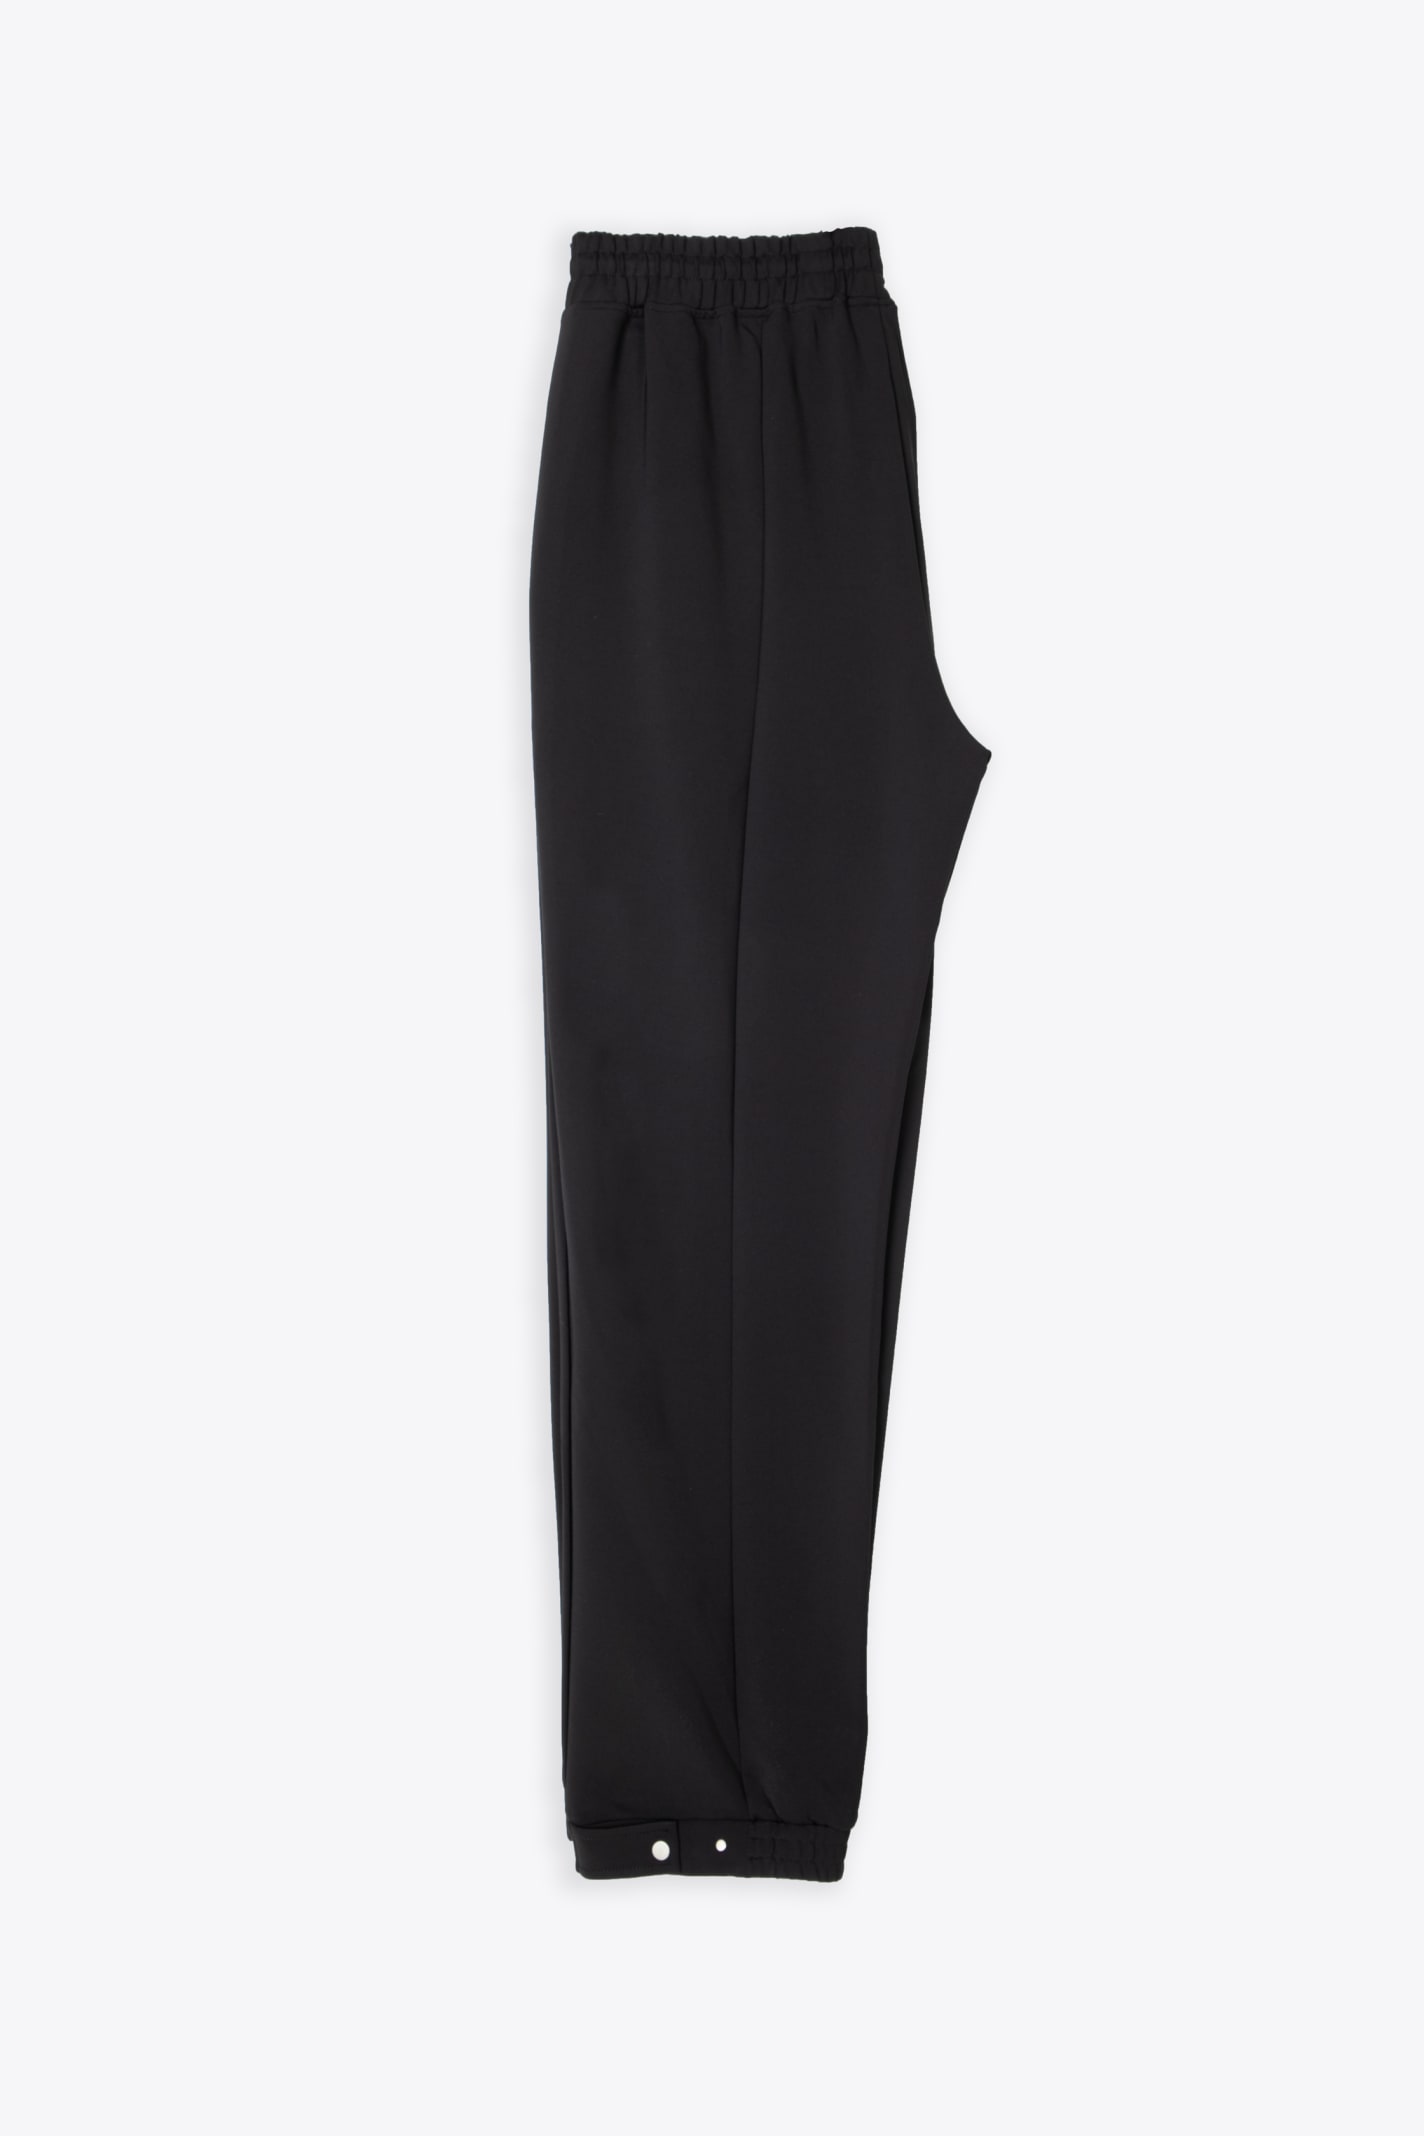 Represent Relaxed Tracksuit Pant Black Tracksuit Pant - Relaxed